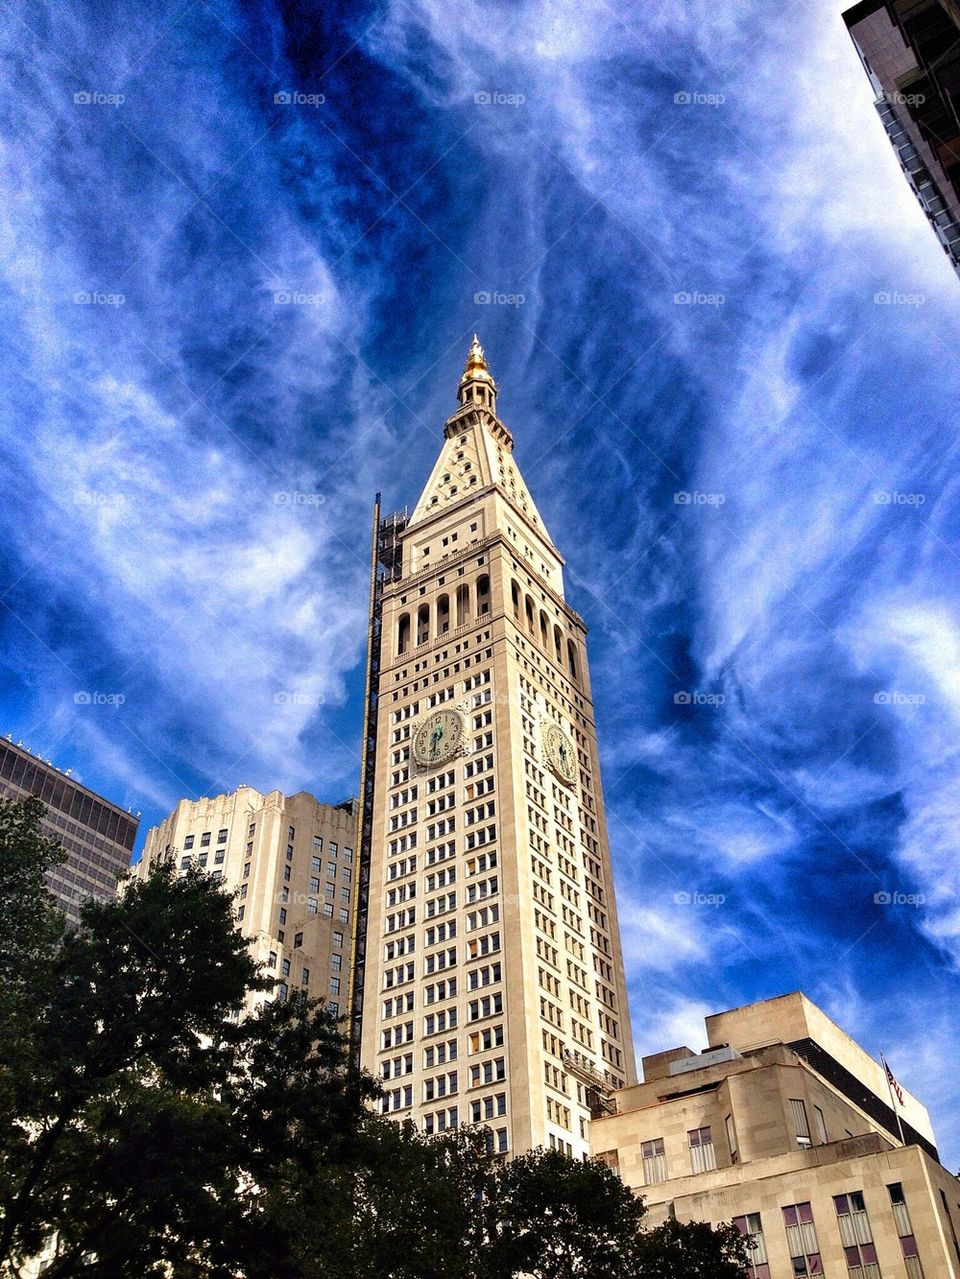 The Met Life Tower